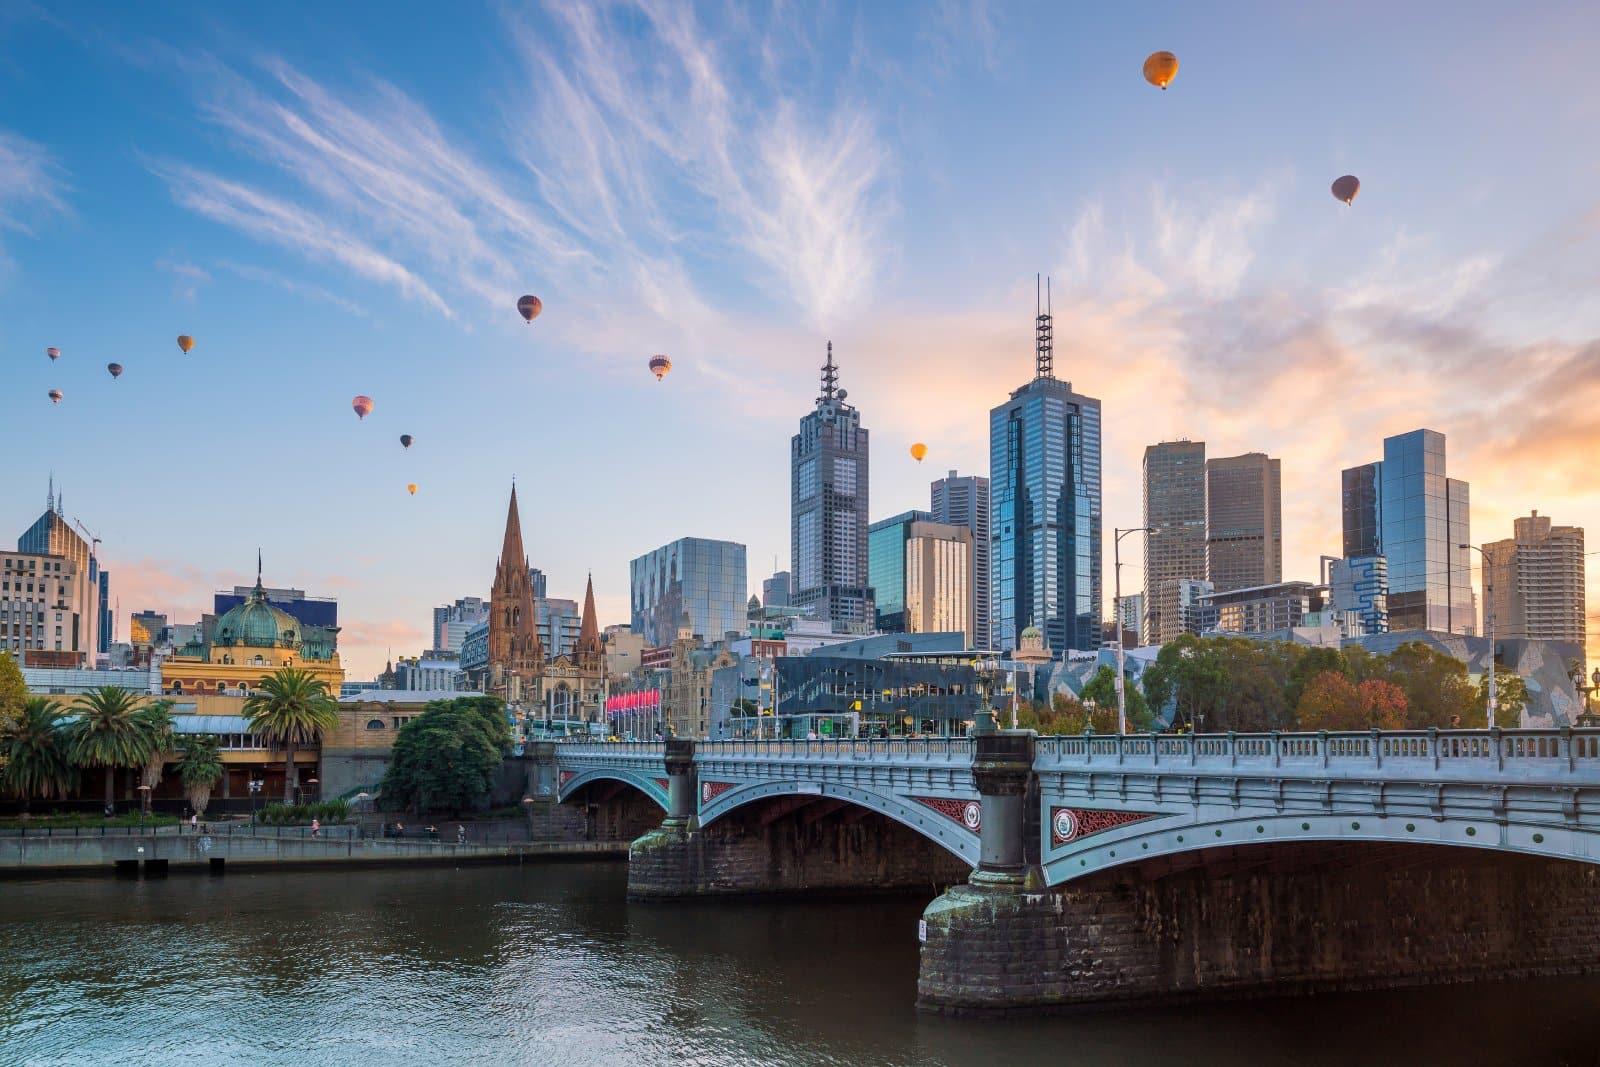 Image Credit: Shutterstock / f11photo <p><span>Melbourne is celebrated for its coffee culture and foodie scene, which includes a thriving community of vegan and vegetarian restaurants. The city’s emphasis on fresh, local produce and culinary creativity is evident in its plant-based offerings, which range from vegan brunch spots to vegetarian fine dining. Melbourne’s laneways and markets are also great places to discover vegan snacks and artisanal products.</span></p> <p><b>Insider’s Tip: </b><span>Check out the vegan options at Melbourne’s famous Queen Victoria Market, where you can enjoy a variety of plant-based foods while soaking up the local atmosphere.</span></p>